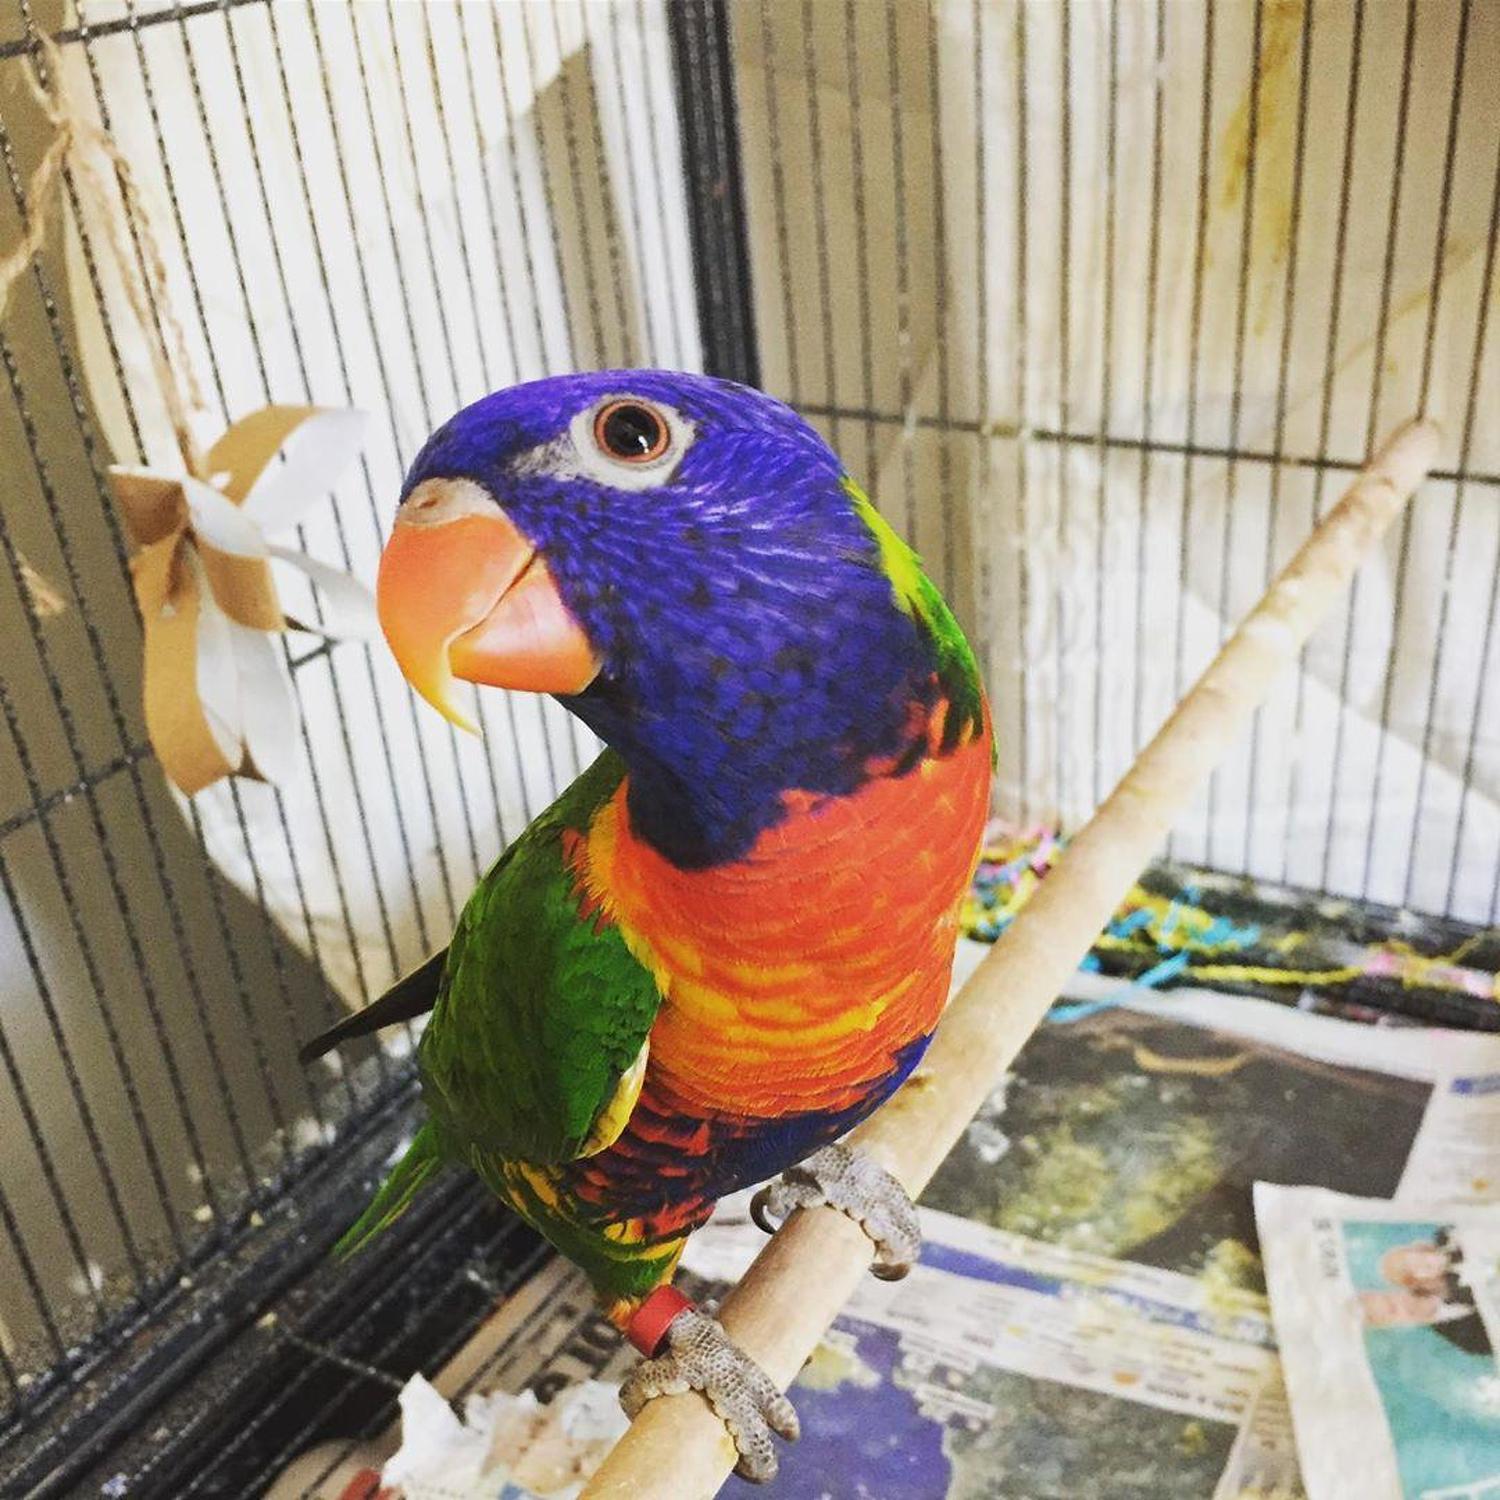 Lory, Ranbow Lorikeets for sale, Birds, for Sale, Price